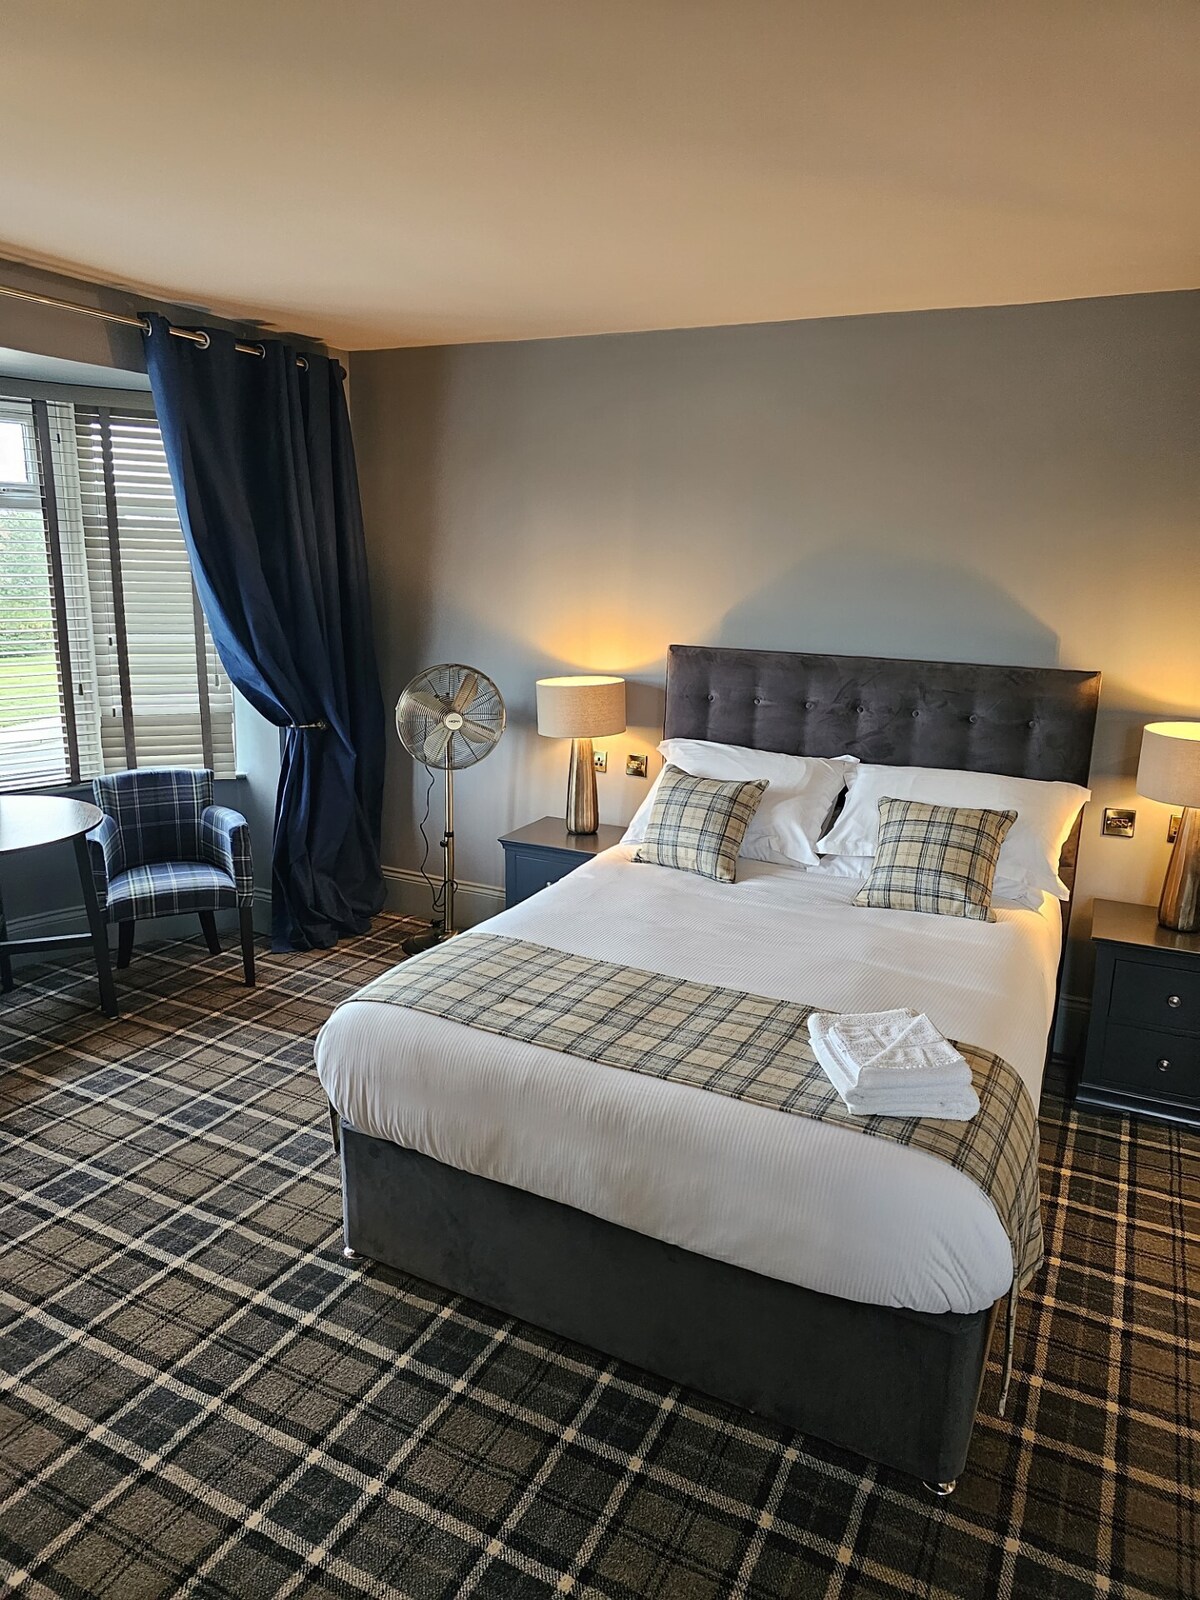 Superior King Room with En-suite